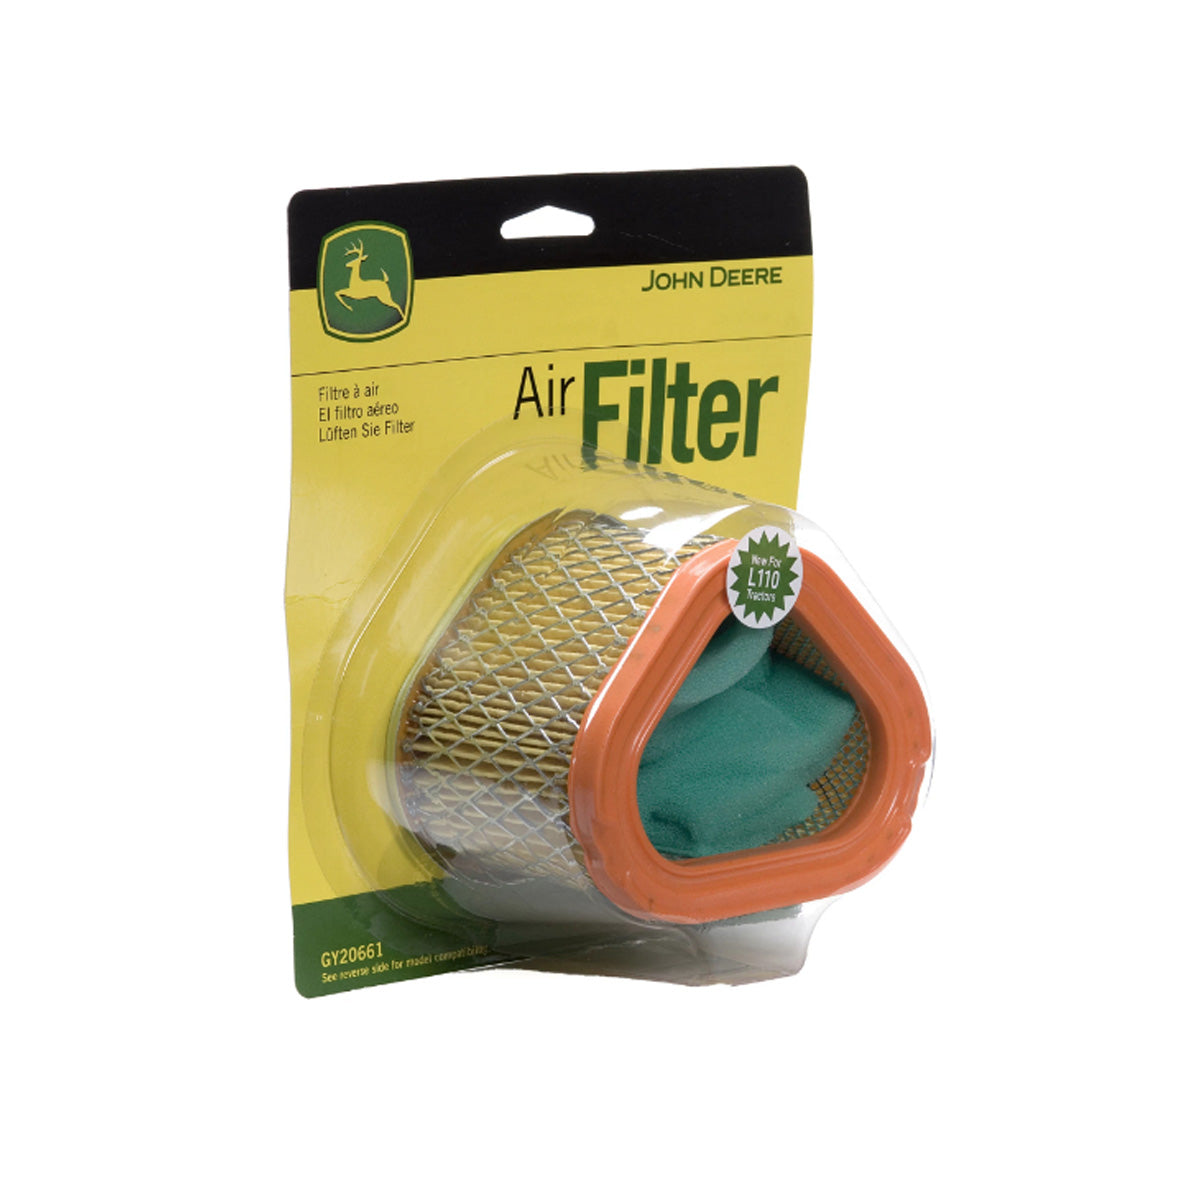 John Deere Air Filter Kit for Gt, Lt, Lx, And 100 Series - GY20661